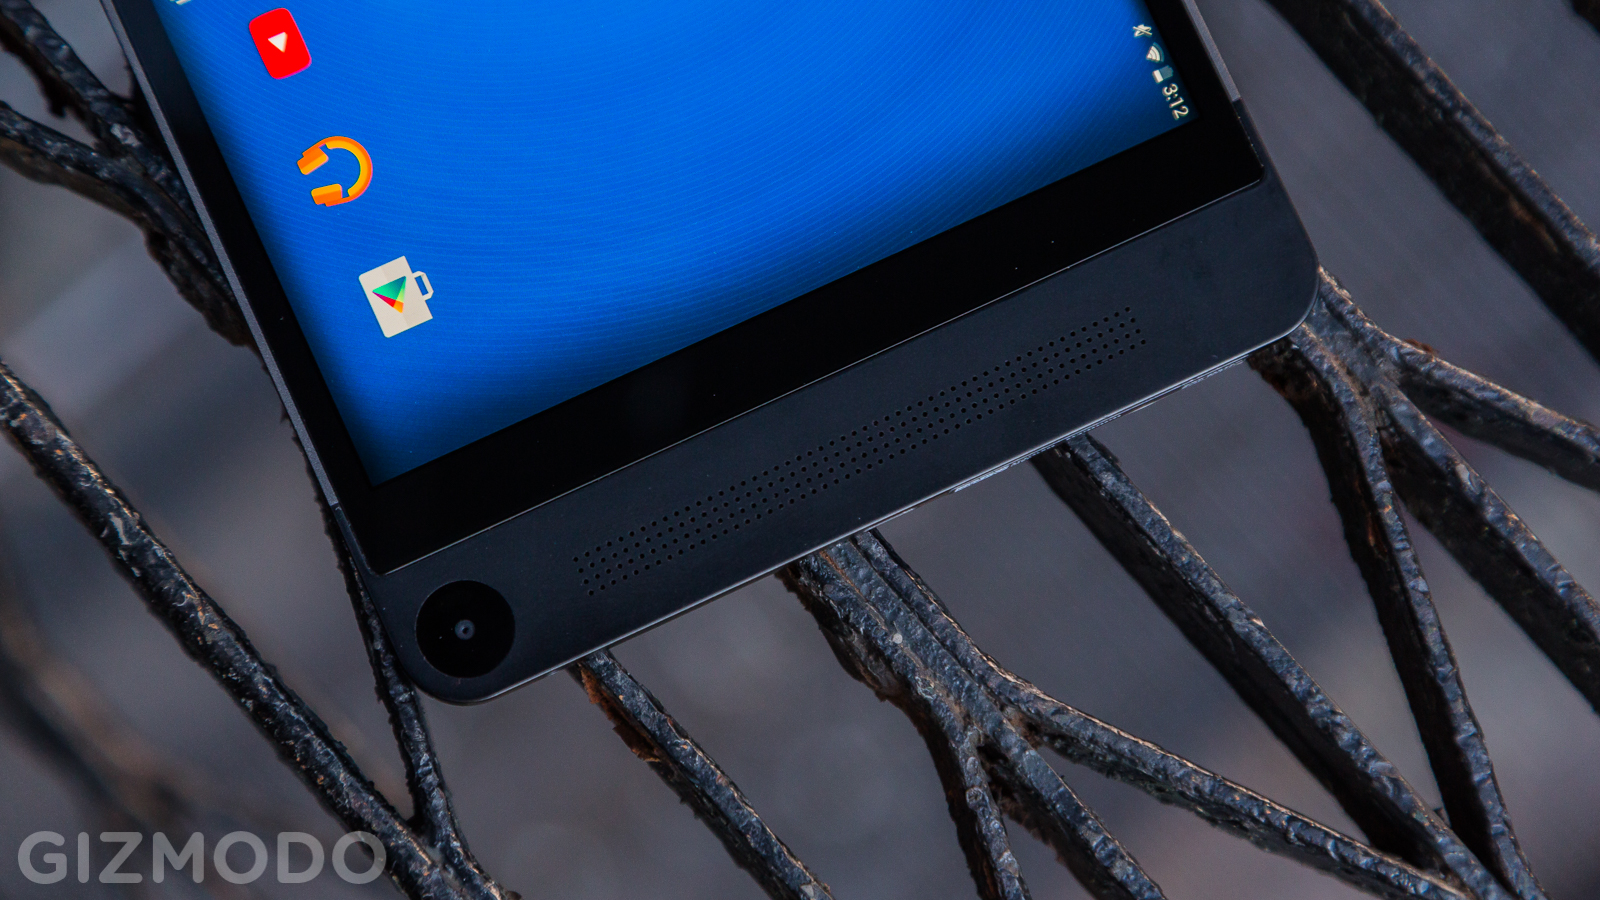 Dell Venue 8 7000 Review: A Terrible Name For An Incredible Tablet 